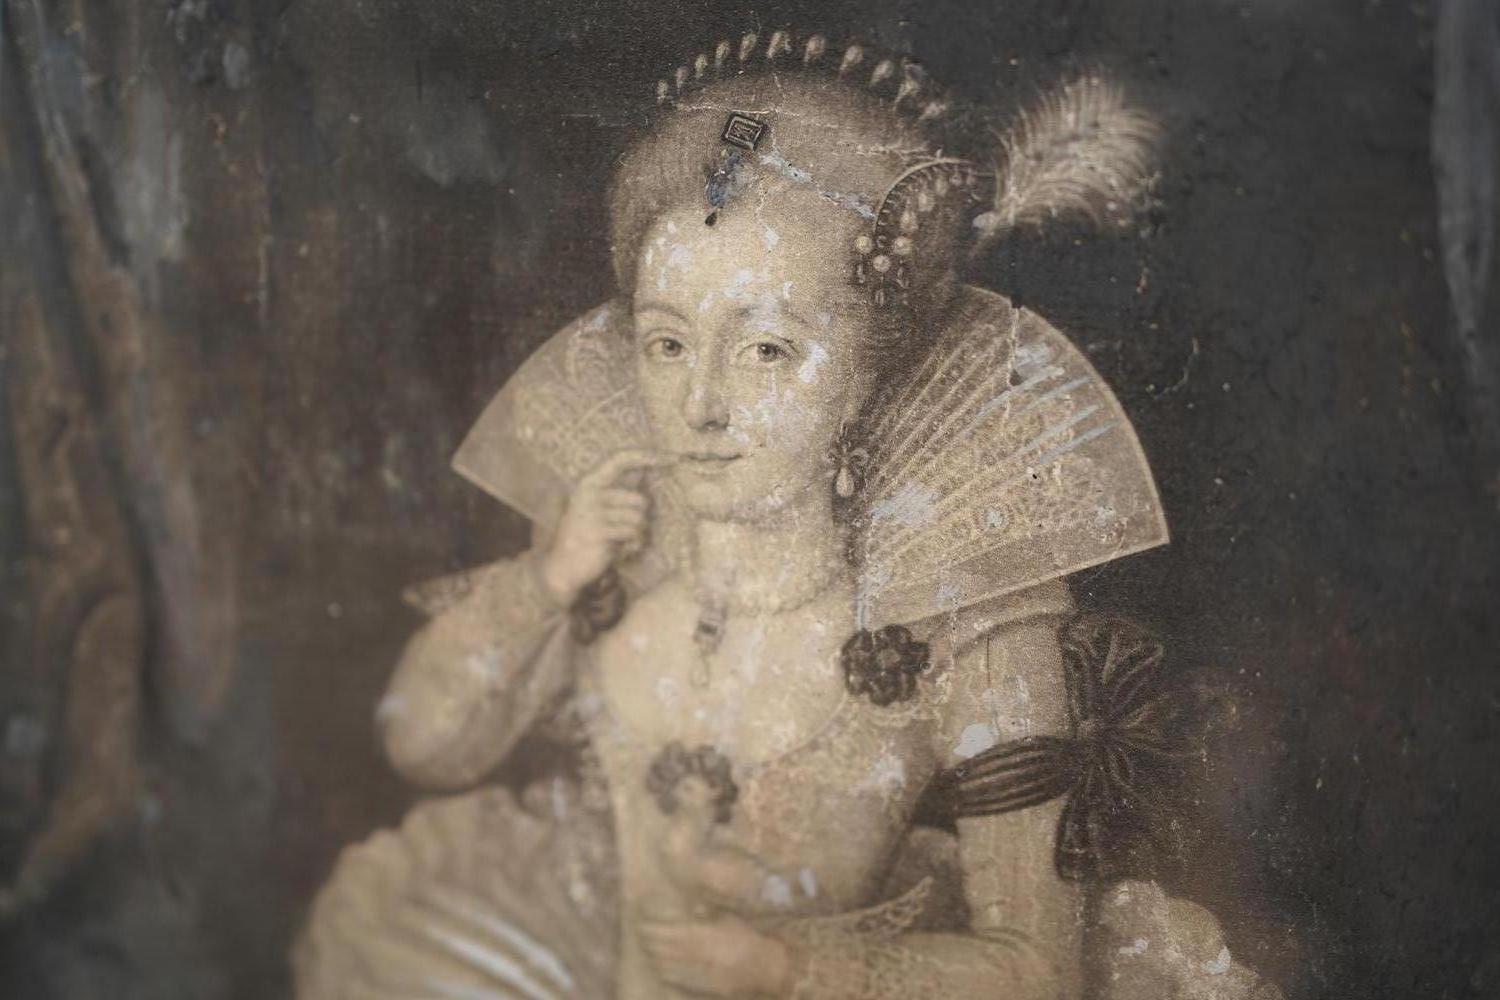 The beautiful mezzotint engraving of Elizabeth I (?), Queen of England showing her whole length with curled hair pearl ropes, jewelled headdress, open collar, pearl necklace, embroidered gown with lace edges, jewelled bodice and hooped skirt,